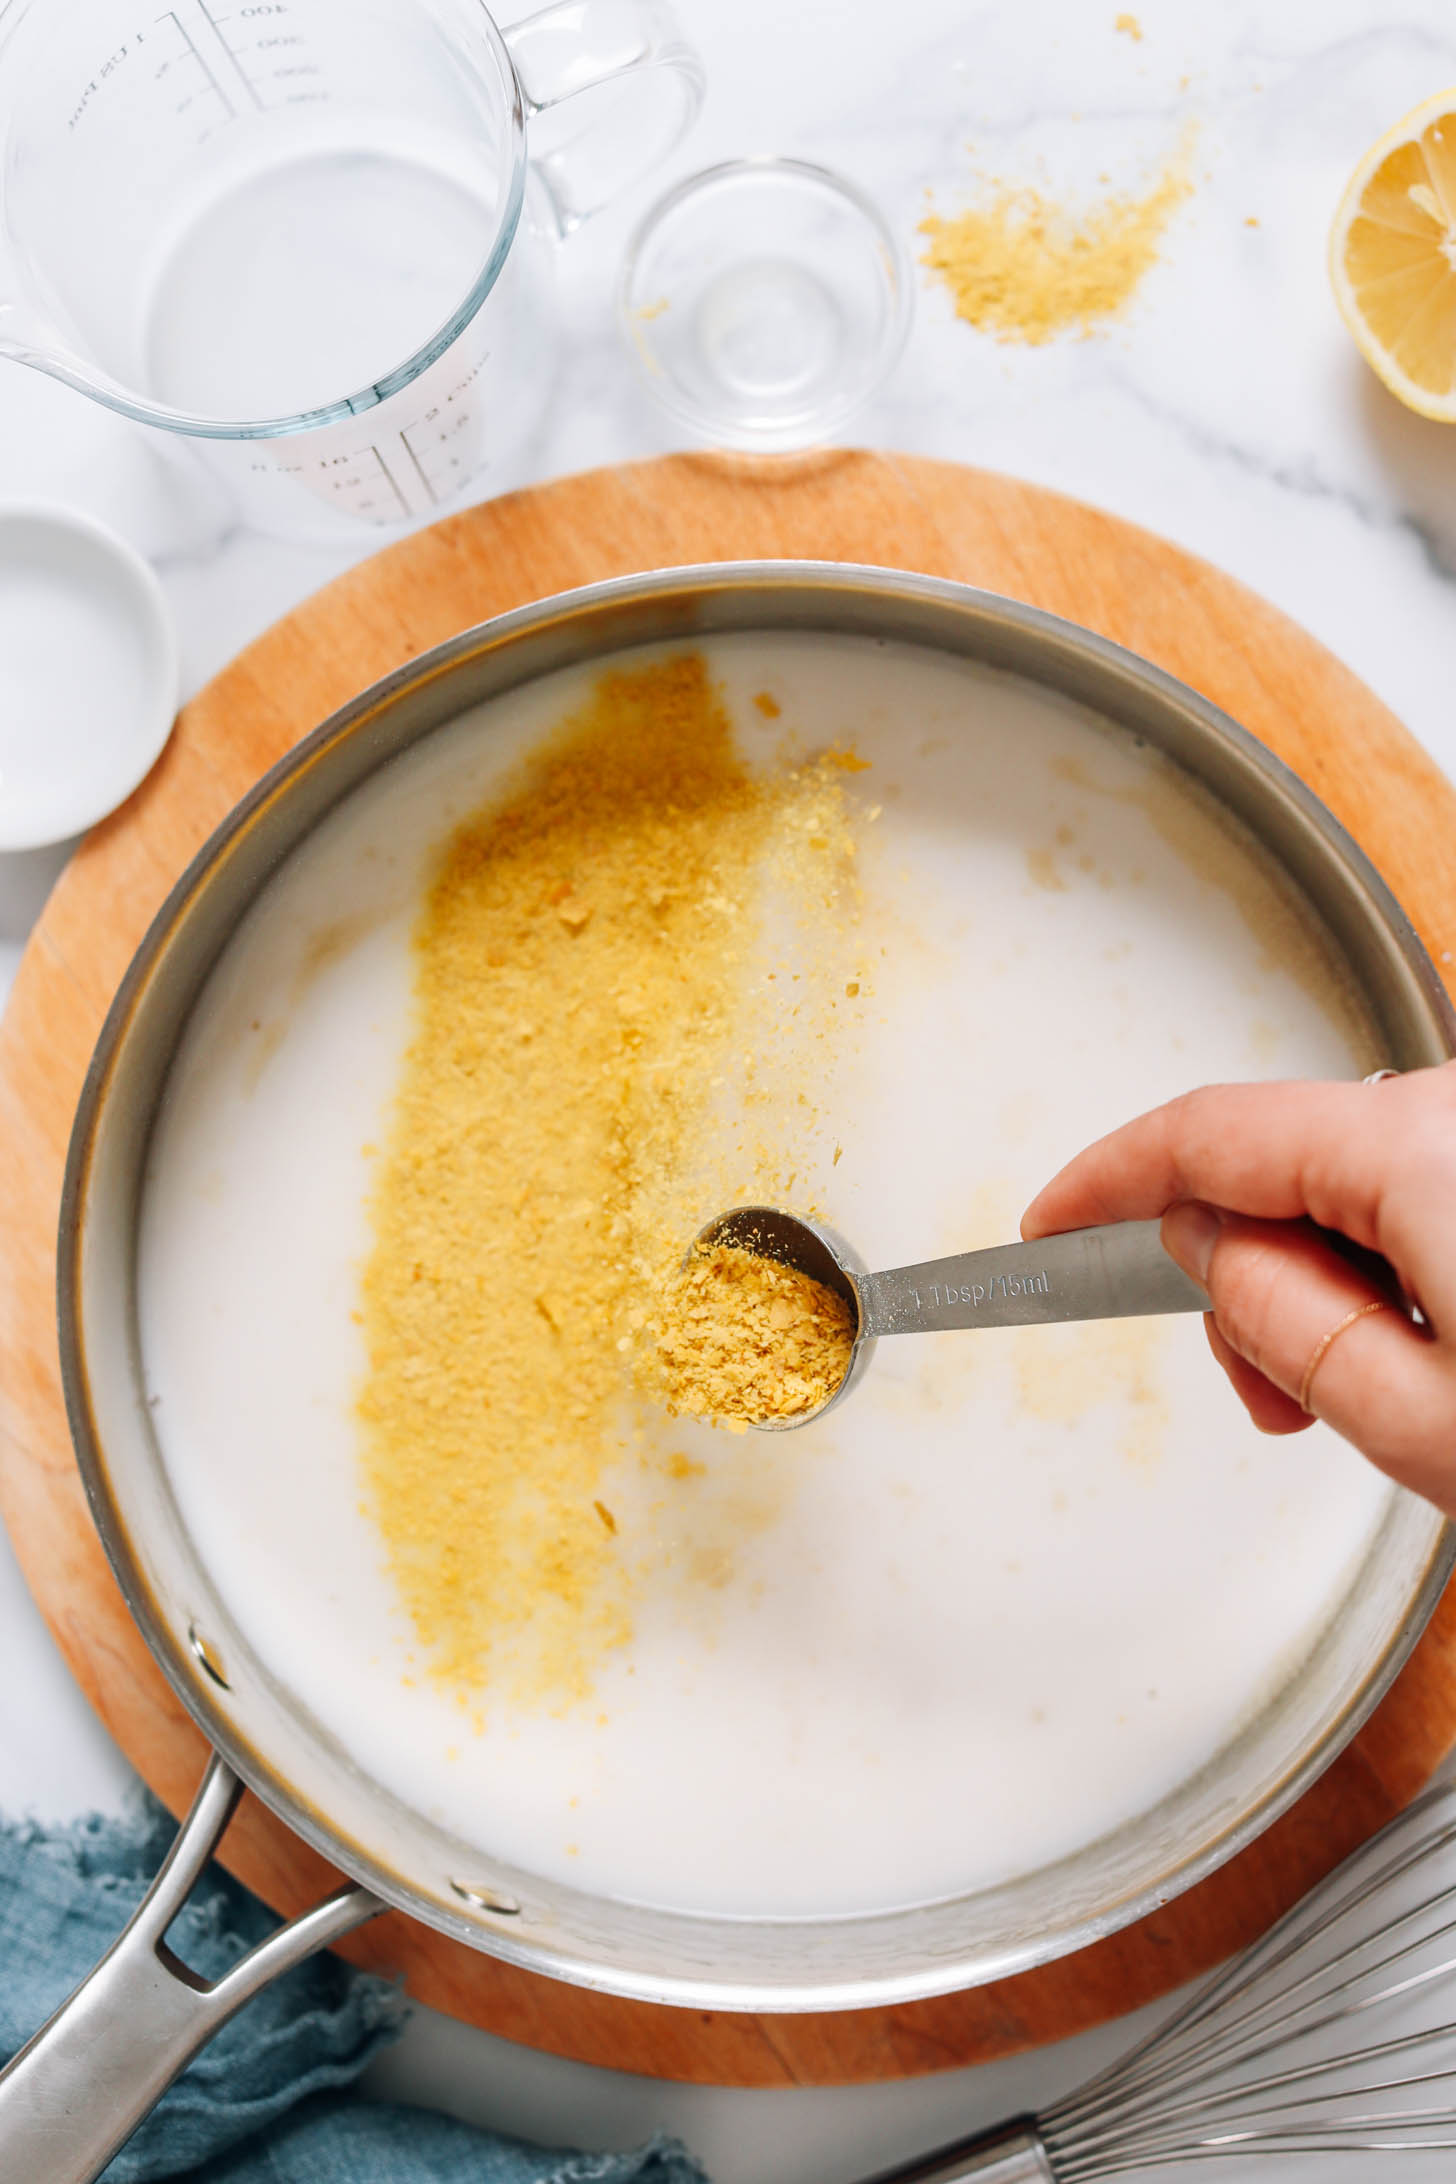 Sprinkling nutritional yeast into a large skillet